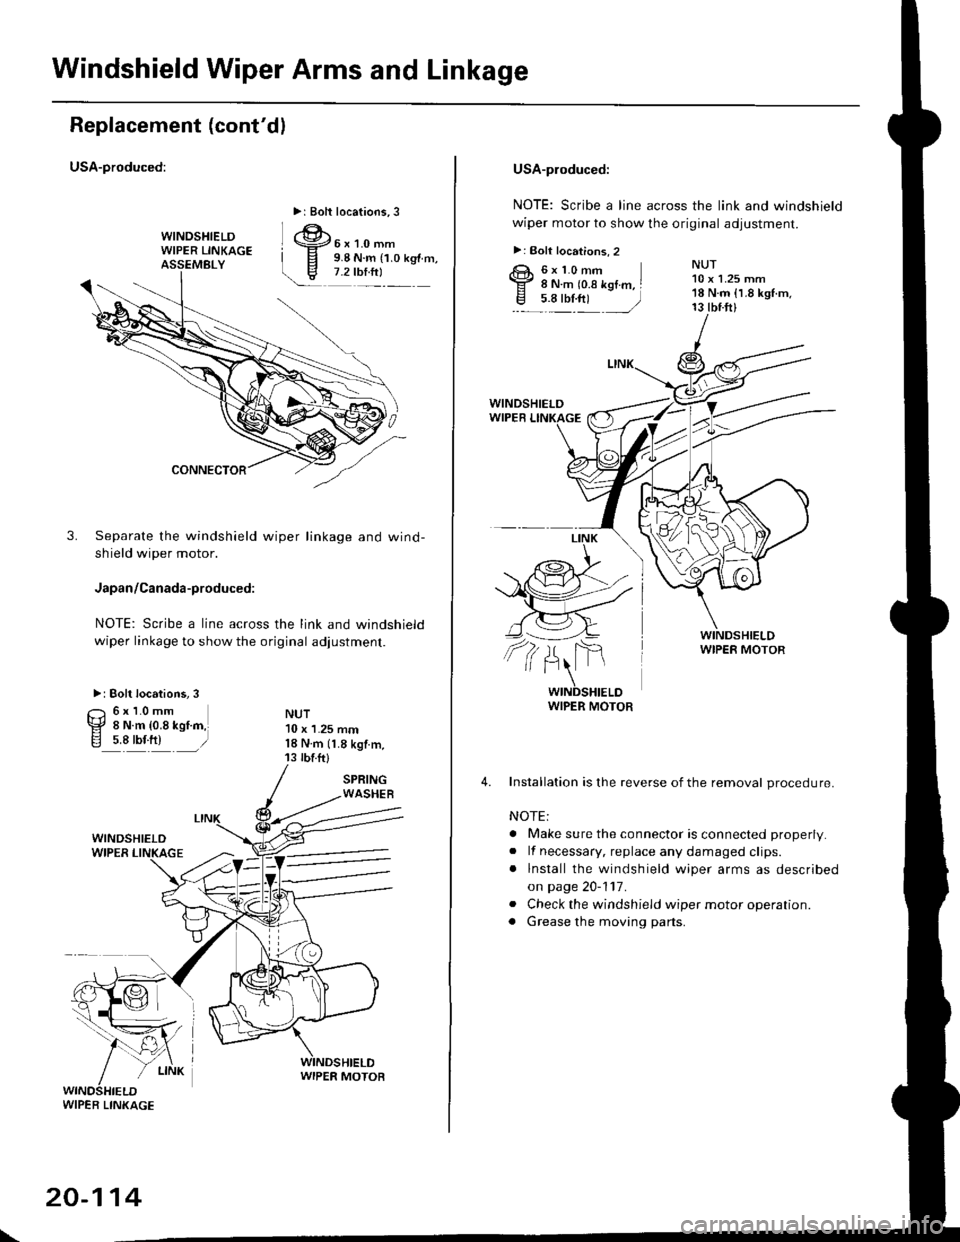 HONDA CIVIC 1996 6.G Workshop Manual Windshield Wiper Arms and Linkage
Replacement (contdl
USA-produced:
3. Separate the windshield wiper linkage and wind-
shield wiper motor.
Japan/Canada-produced:
NOTE: Scribe a line across the link a